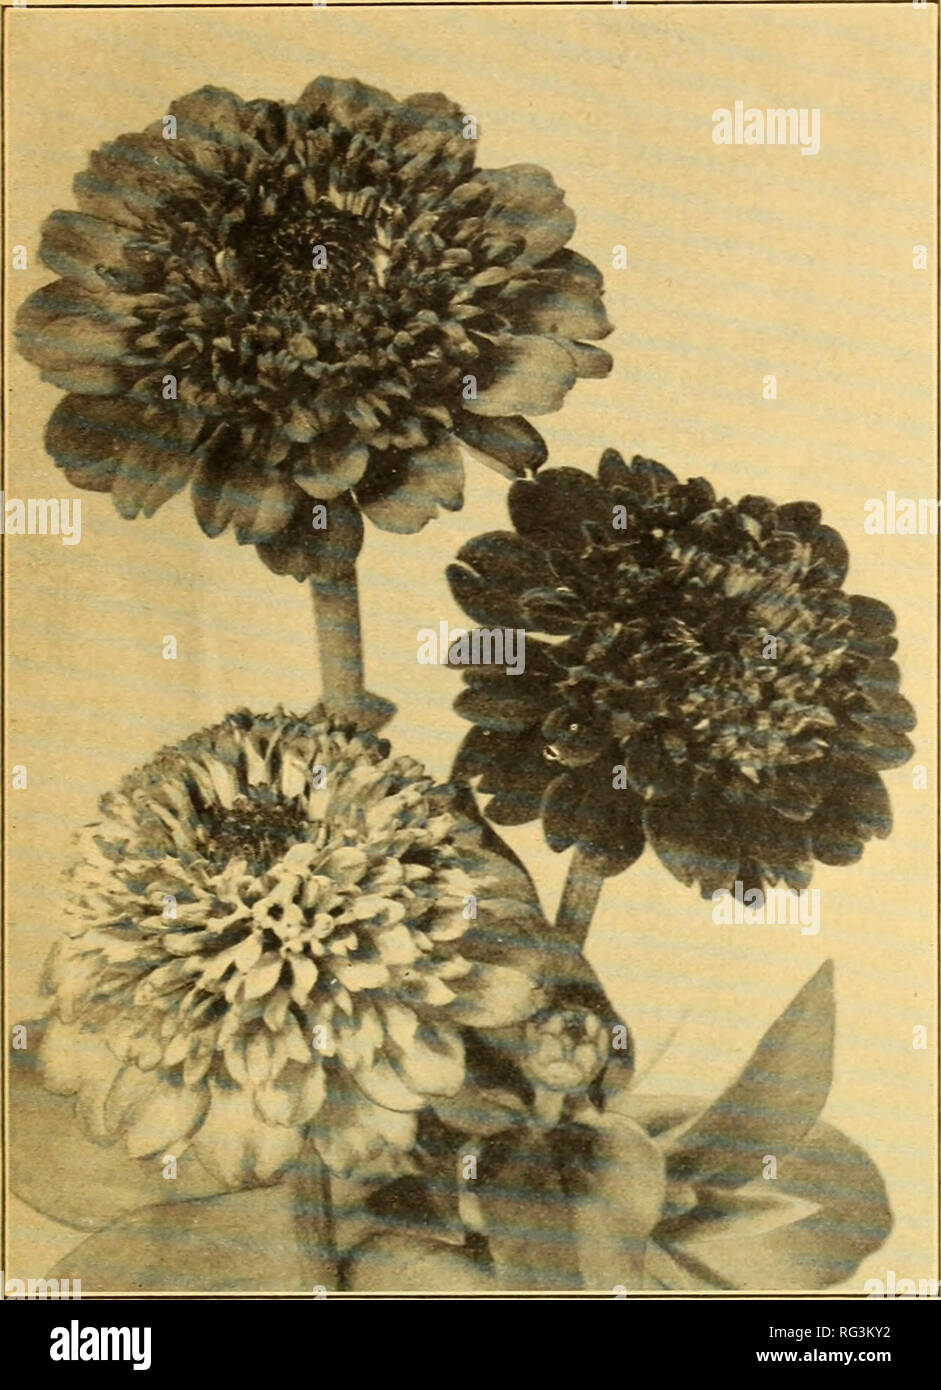 . California gardening. Nurseries (Horticulture) Catalogs; Flowers Seeds Catalogs; Plants, Ornamental Catalogs; Vegetables Seeds Catalogs; Fruit trees Catalogs; Trees Catalogs; Grasses Seeds Catalogs; Gardening Equipment and supplies Catalogs. Germain's Premium Flower Seeds. Scabious-flowered Zinnia NEW SHIRLEY POPPY 3684—Double Sweet Brier. An exquisite shade of delicate pink. The flowers are large and fully double, and are composed of broad rose-like petals of a lovely satiny texture. This vari- ety has better keeping qualities than the single sorts and makes a delightful cut flower. Price p Stock Photo